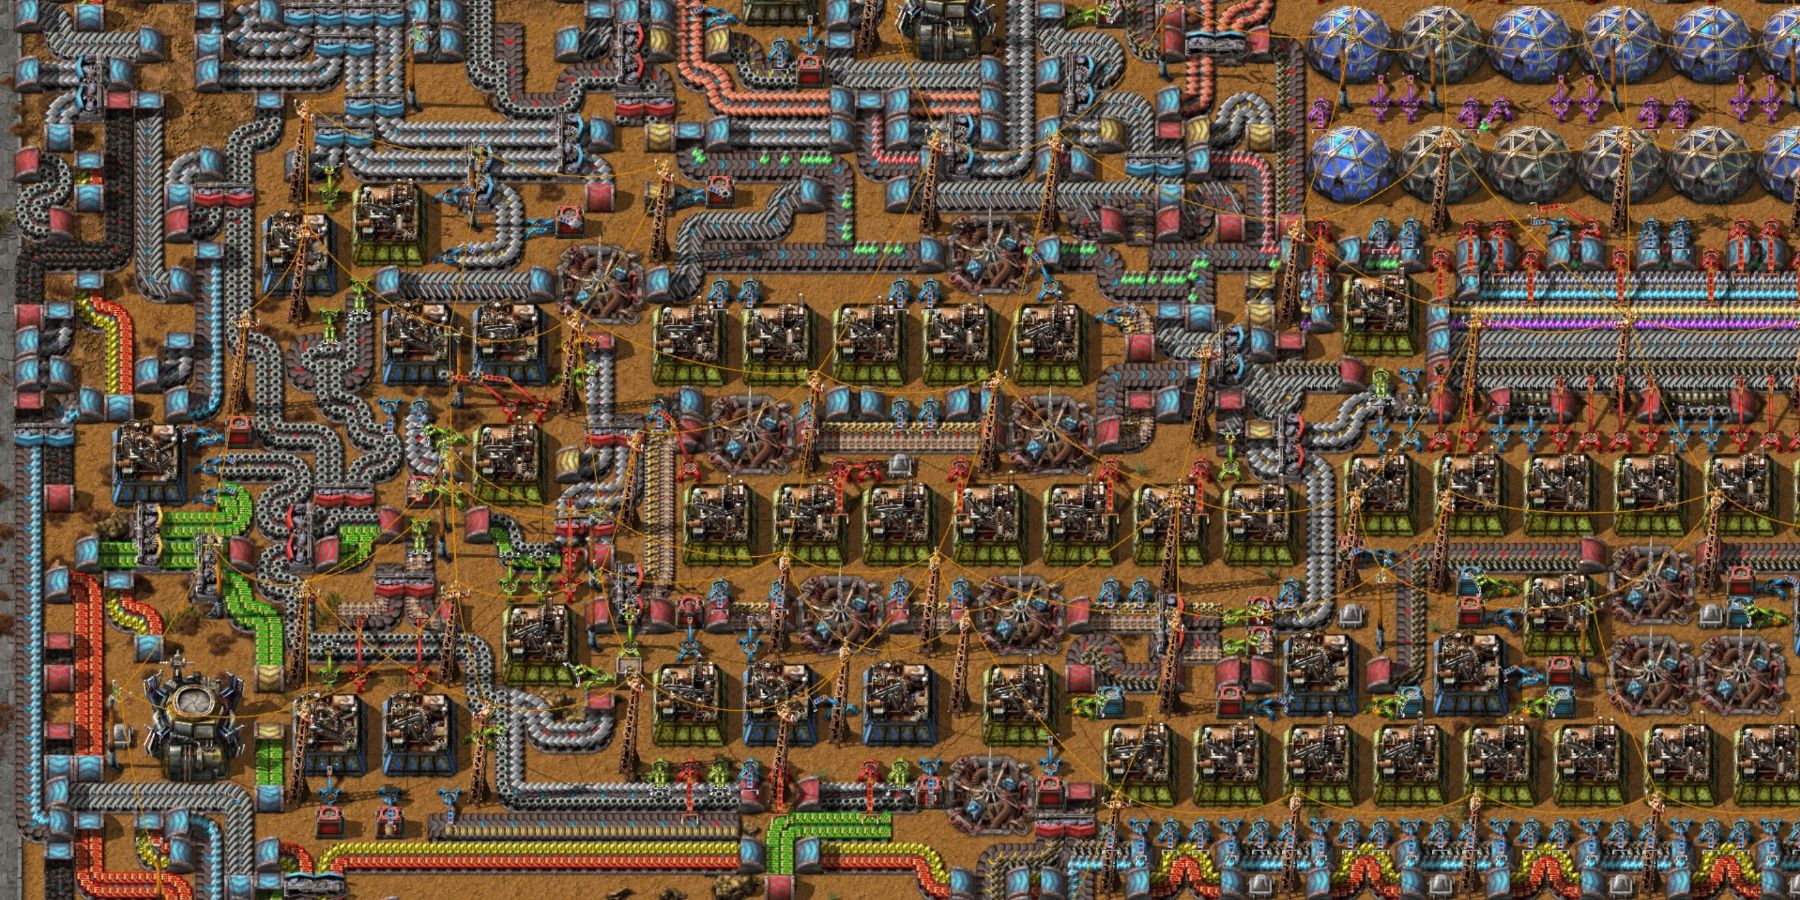 A look at some of the parts in Factorio